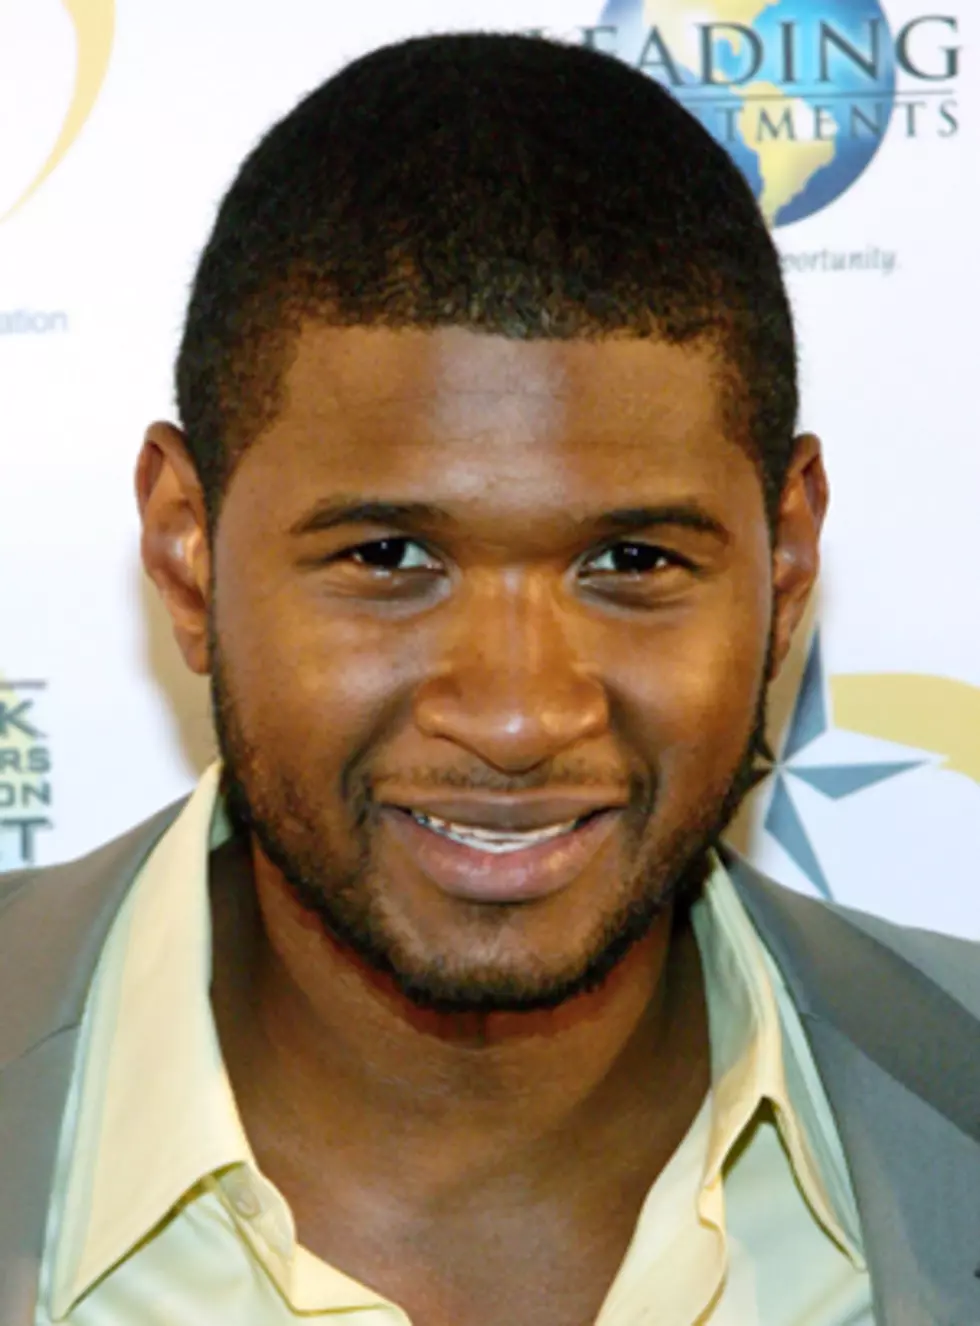 Usher’s Son Hospitalized After Pool Accident